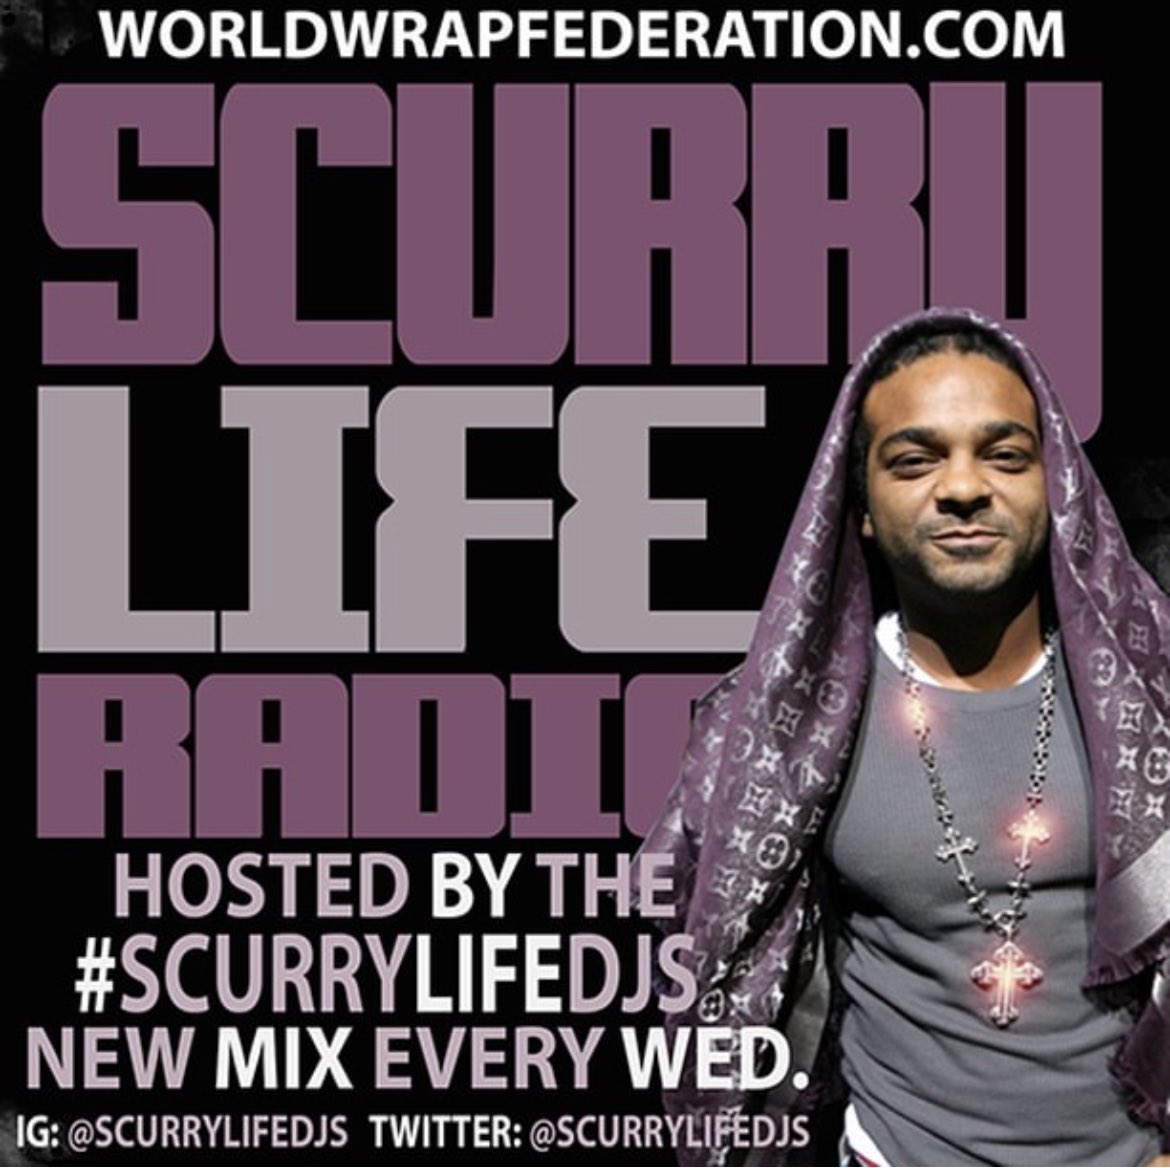 #scurryliferadio episode 516 hosted by @DjTonyharder podomatic.com/podcasts/scurr… #SCURRYLIFEDJS — with Tony Harder. @OFFICIALPWS @WorldWrap @SCURRYLIFEDJs @SCURRYLIFEDVD @WORLDWRAPMODELS @SADADAY @bchpro @BTeam4life @hustla_black @DJTonyHarderSU @STACKUPVP